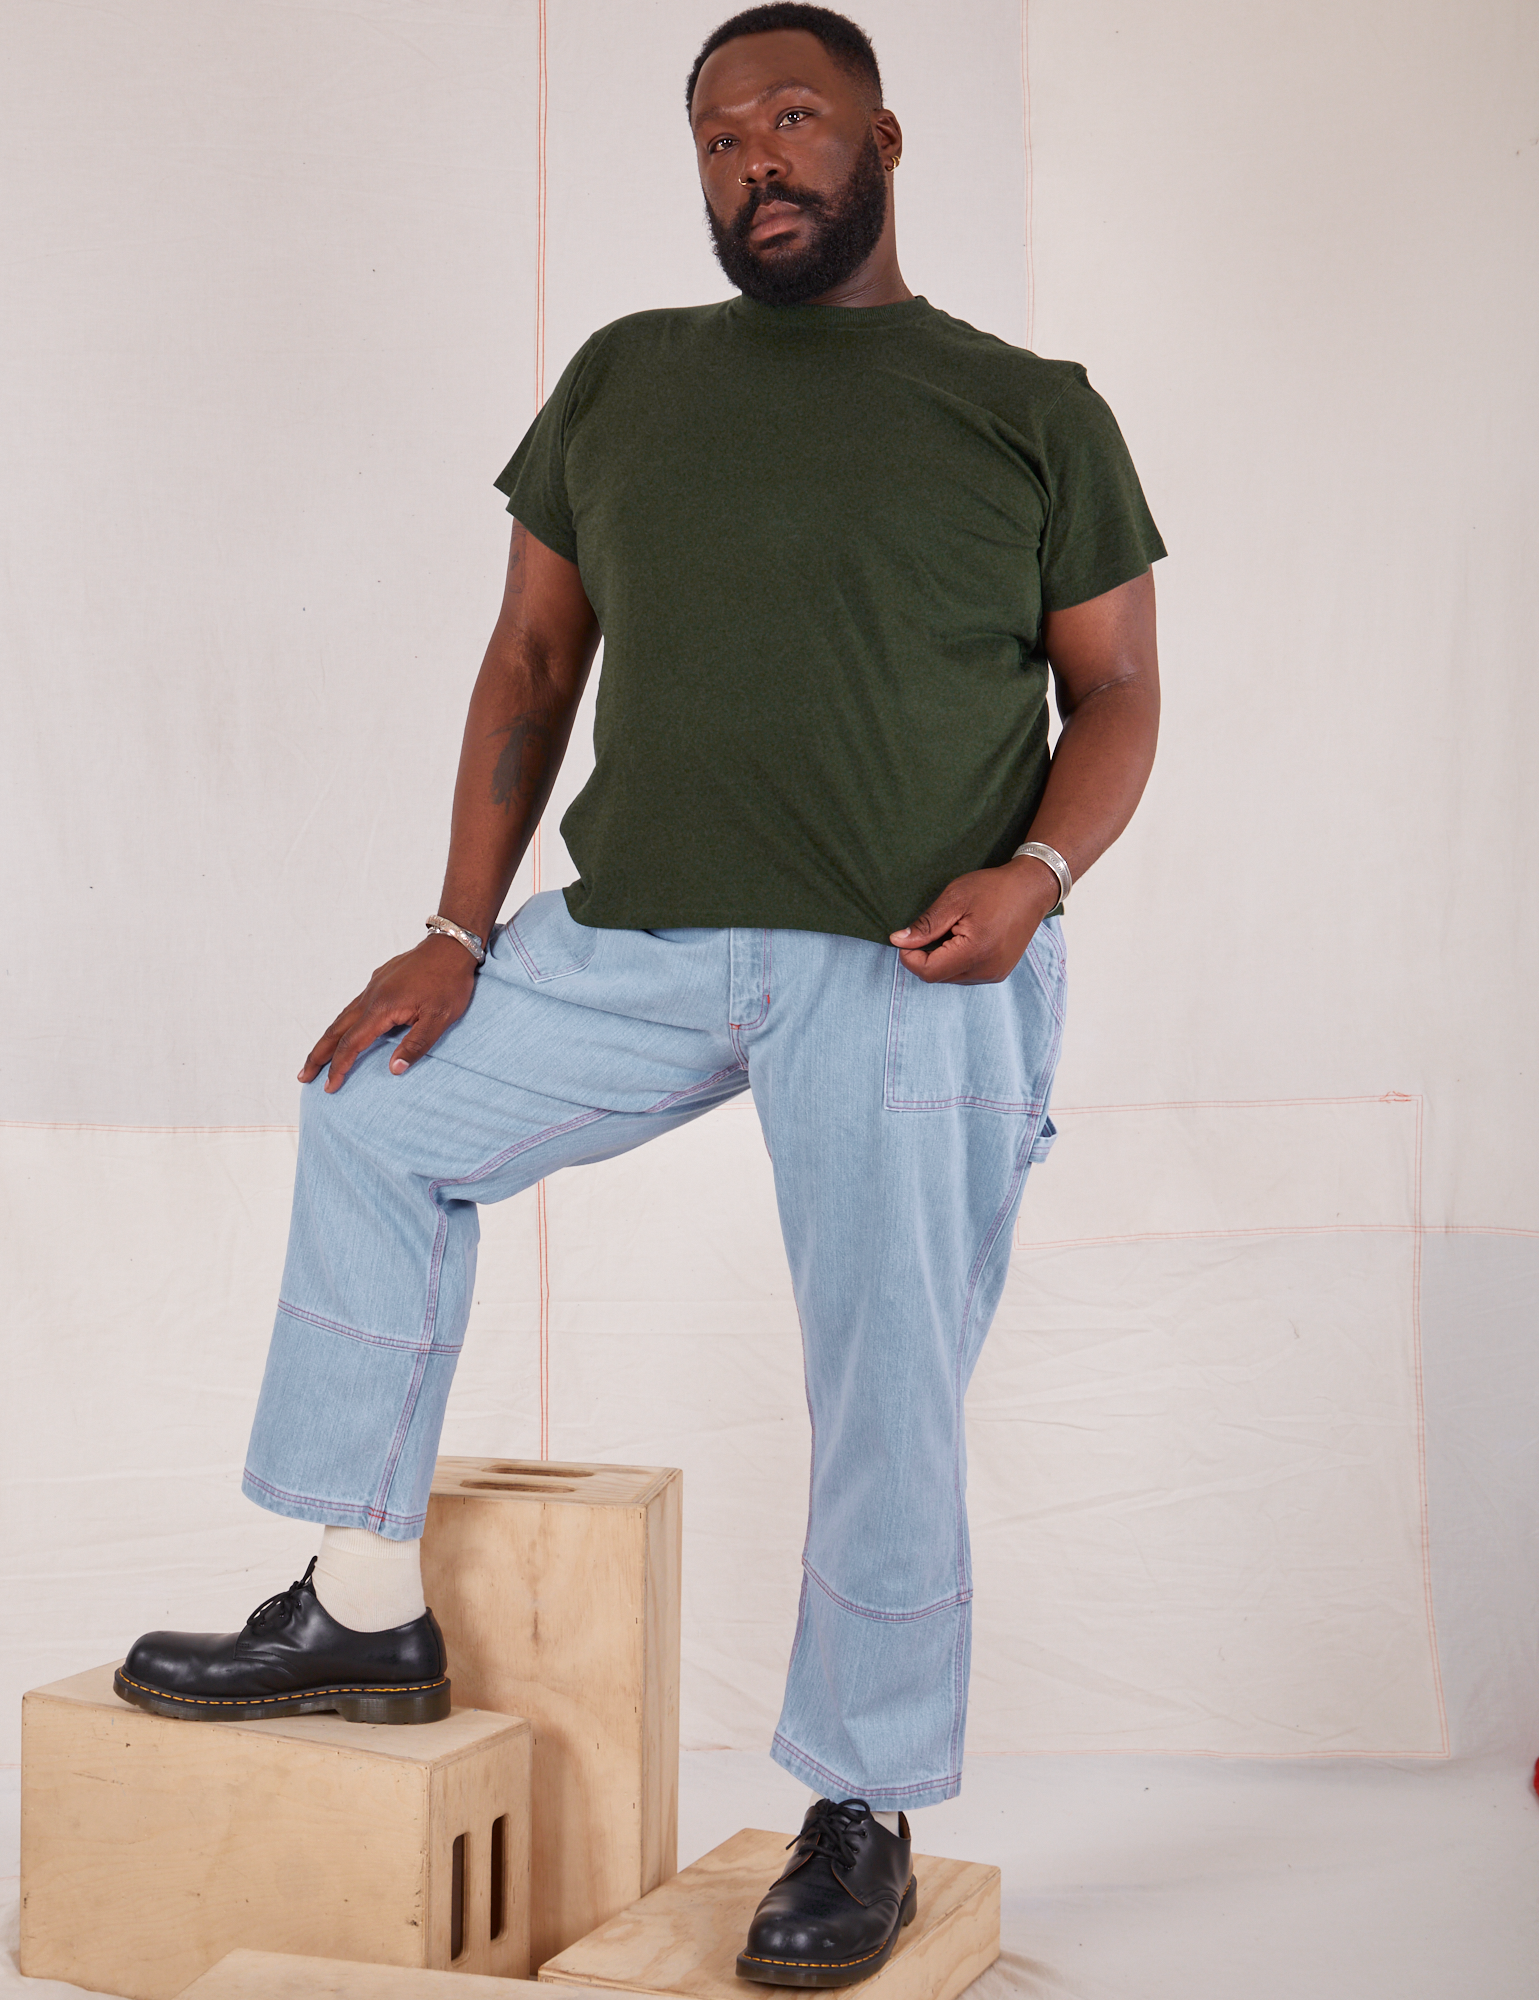 Elijah is 6&#39;0&quot; and wearing 2XL Organic Vintage Tee in Swamp Green paired with light wash Carpenter Jeans